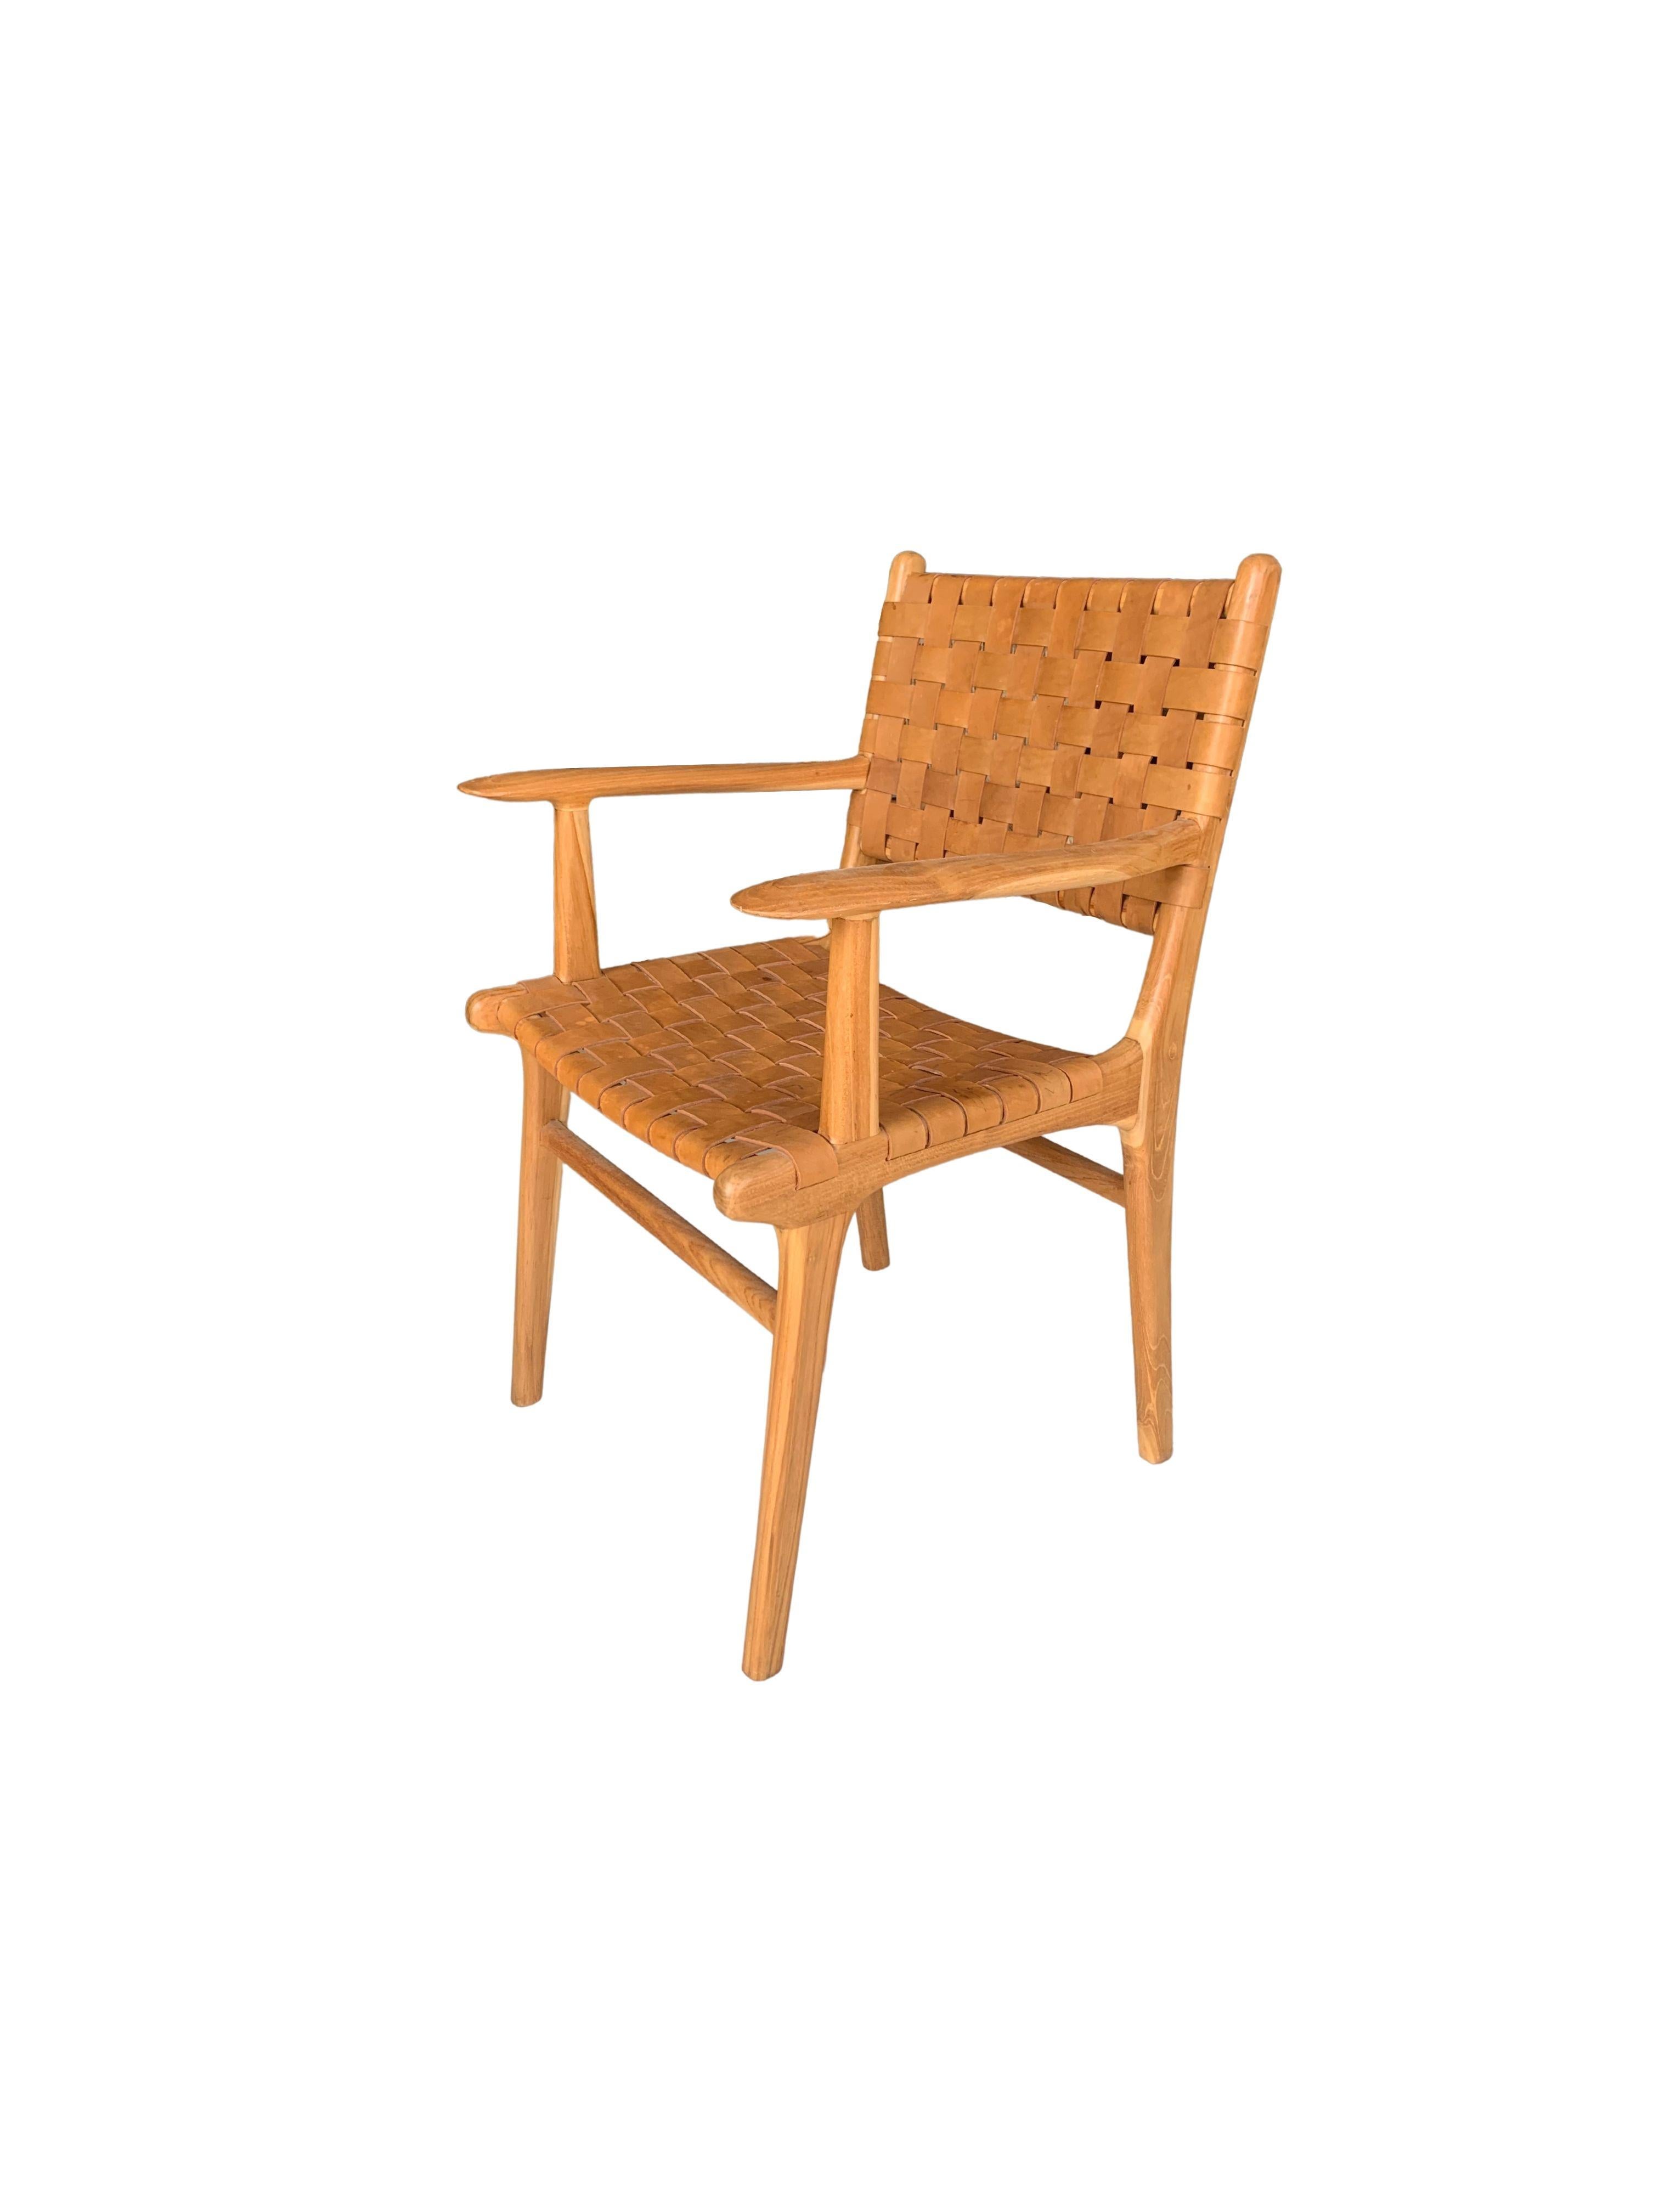 A hand-crafted teak framed & woven leather strap chair. These chairs are crafted by local artisans using a wood joinery technique without the use of nails. They feature a subtle wood texture and are robust and sturdy.